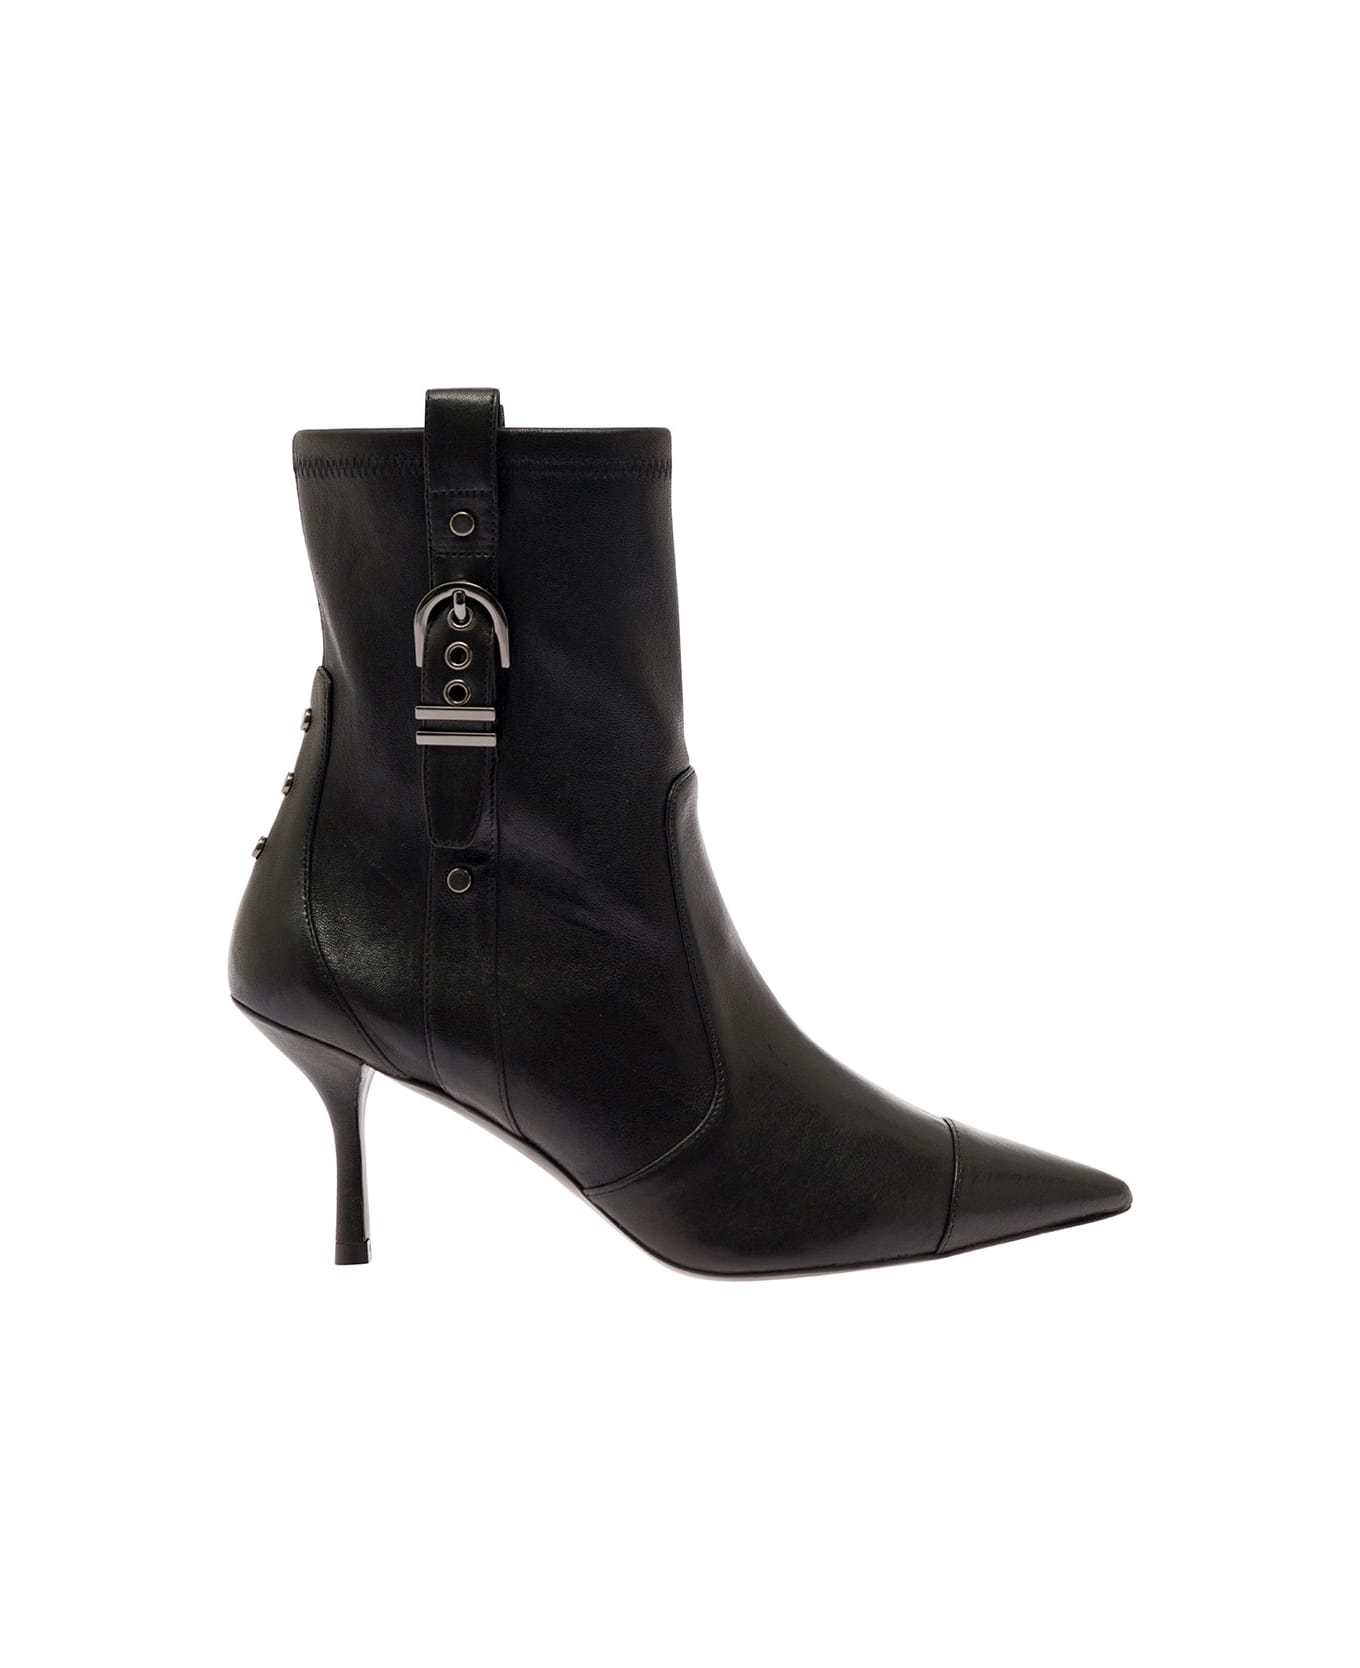 Stuart Weitzman Black Bootie With Buckle Detail And Stiletto Heel In Smooth Leather Woman - Black